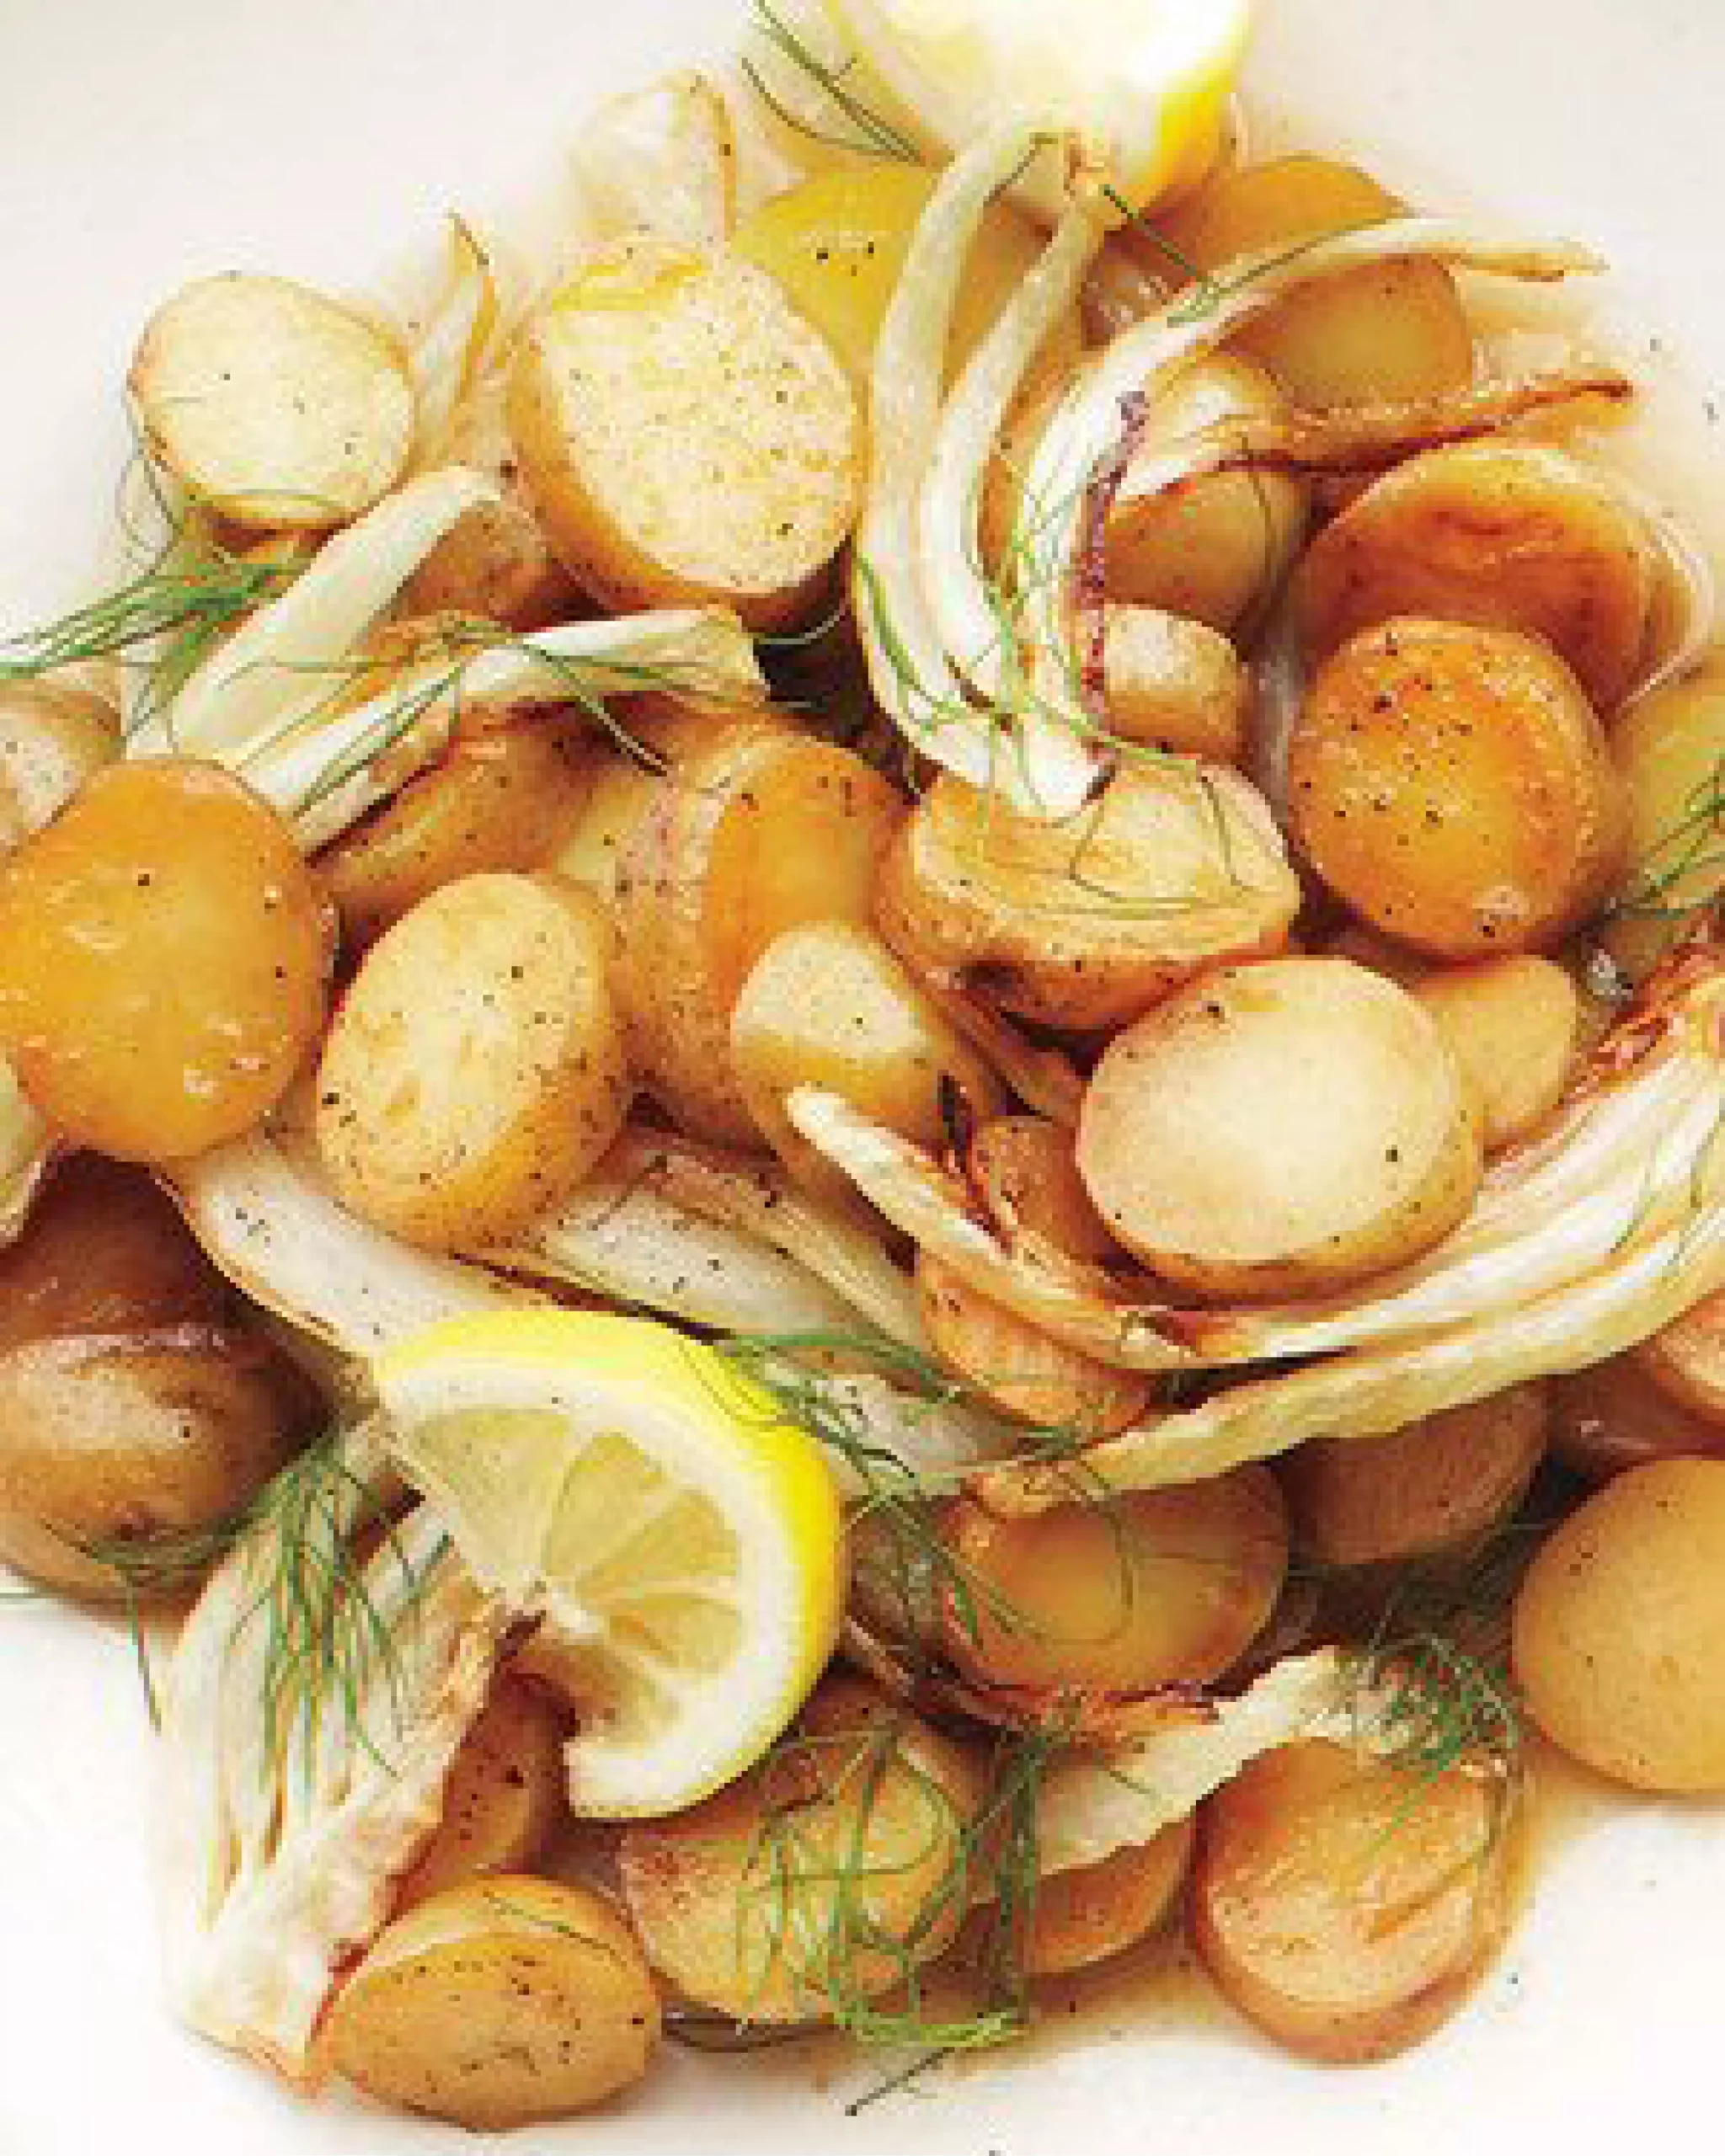 Braised Fennel with Tomatoes Potatoes